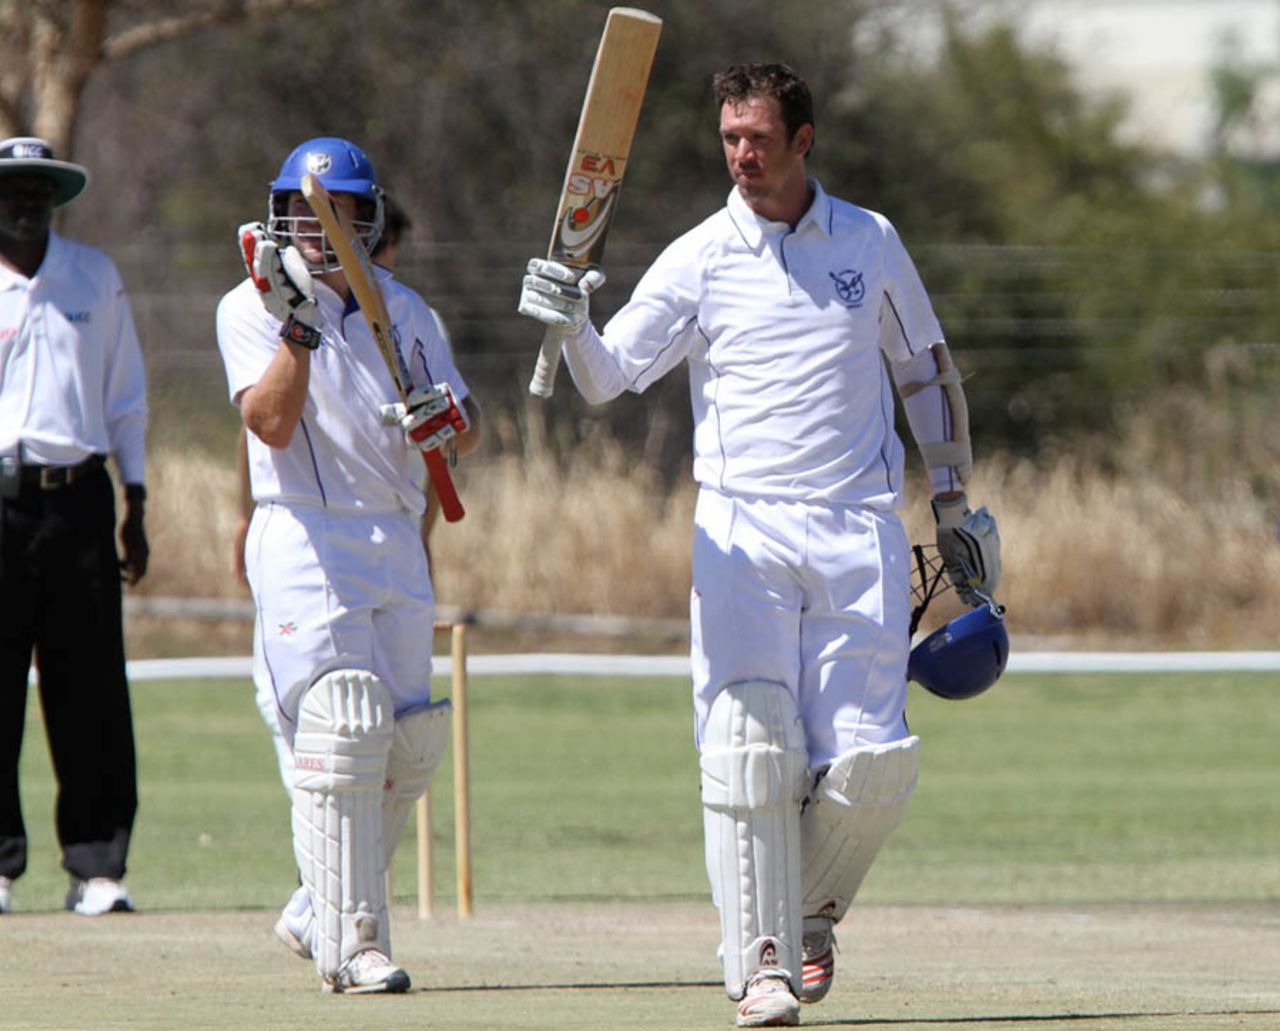 Gerrie Snyman scored a double-hundred, Namibia v Kenya, ICC Intercontinental Cup, 3rd day, Windhoek, October 1, 2012